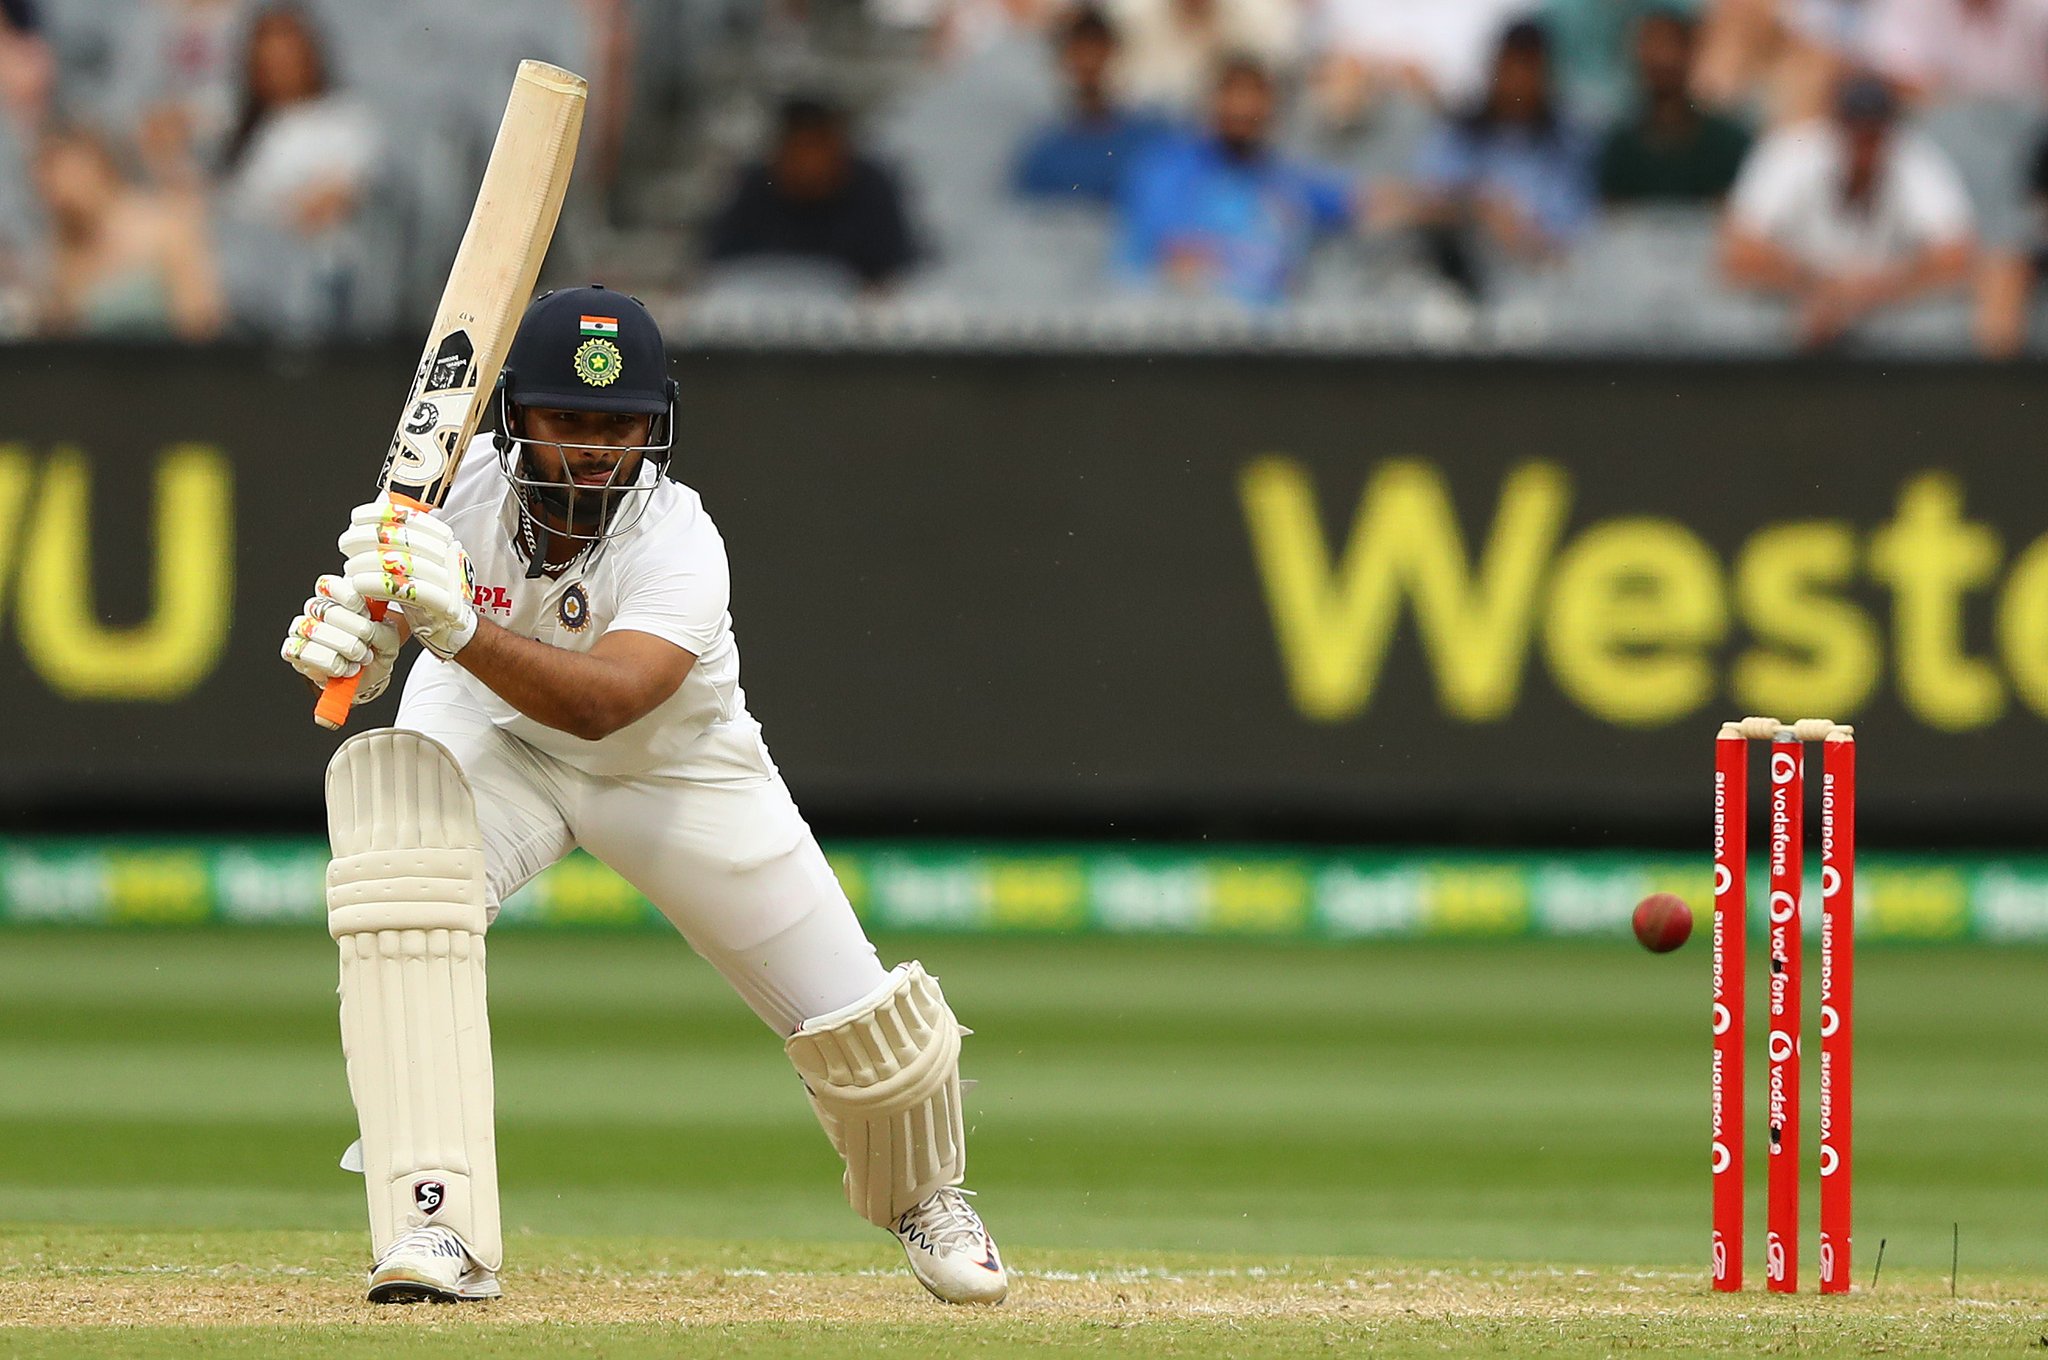 IND vs ENG, 5th Test | Internet reacts to Rishabh Pant's brilliant 100 against England